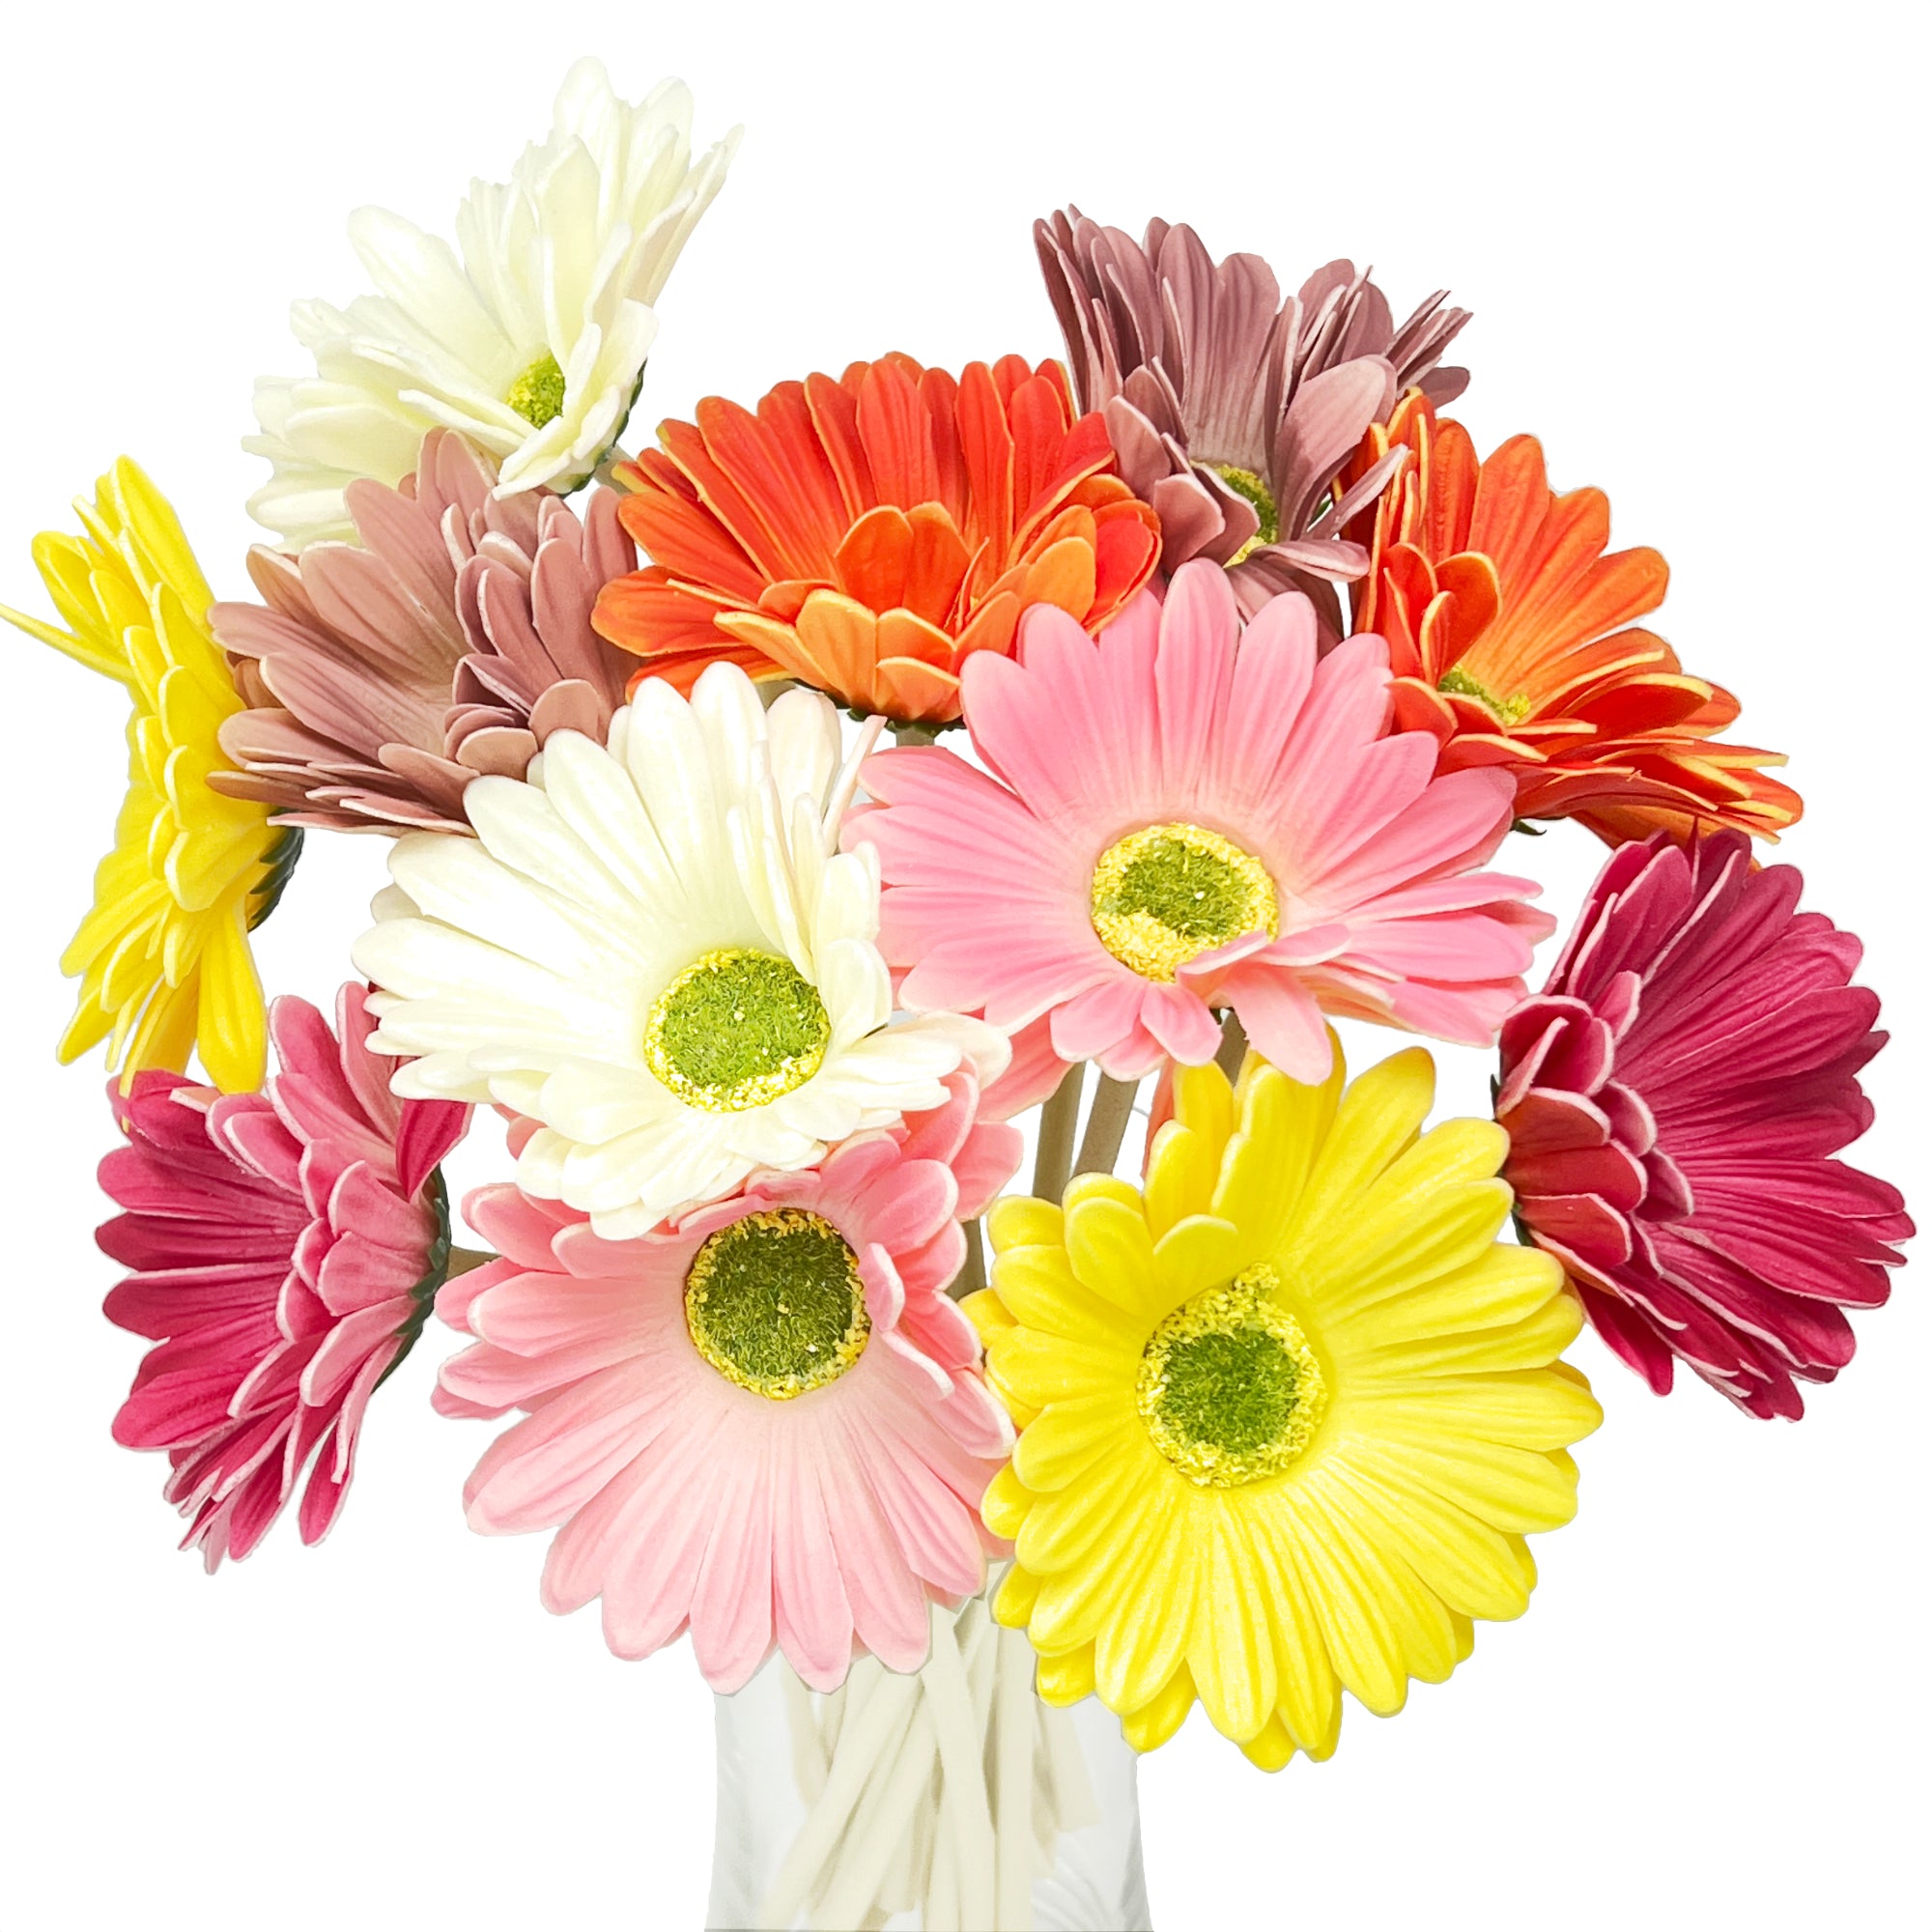 Wholesale artificial daisy flowers To Beautify Your Environment 